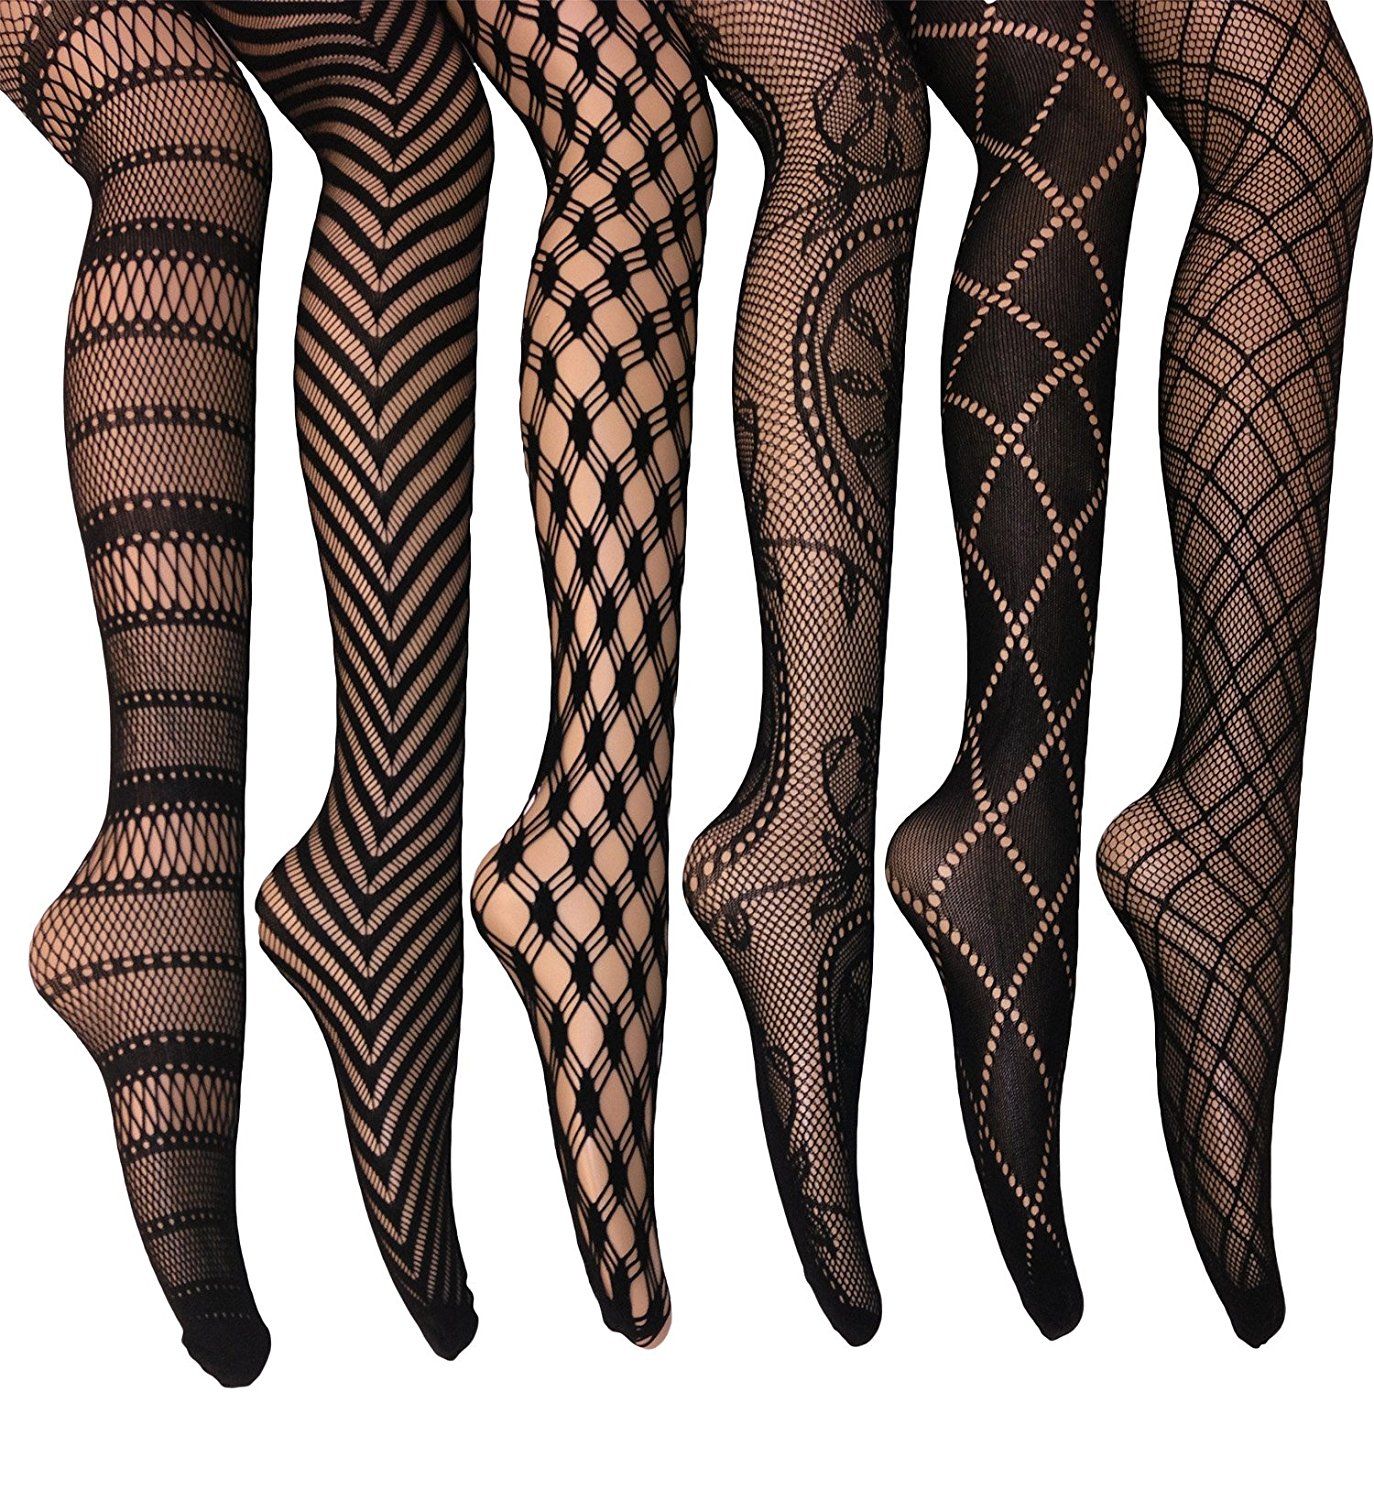 patterned tights frenchic fishnet lace stocking tights extended sizes (pack of 6) at amazon opbbhxl